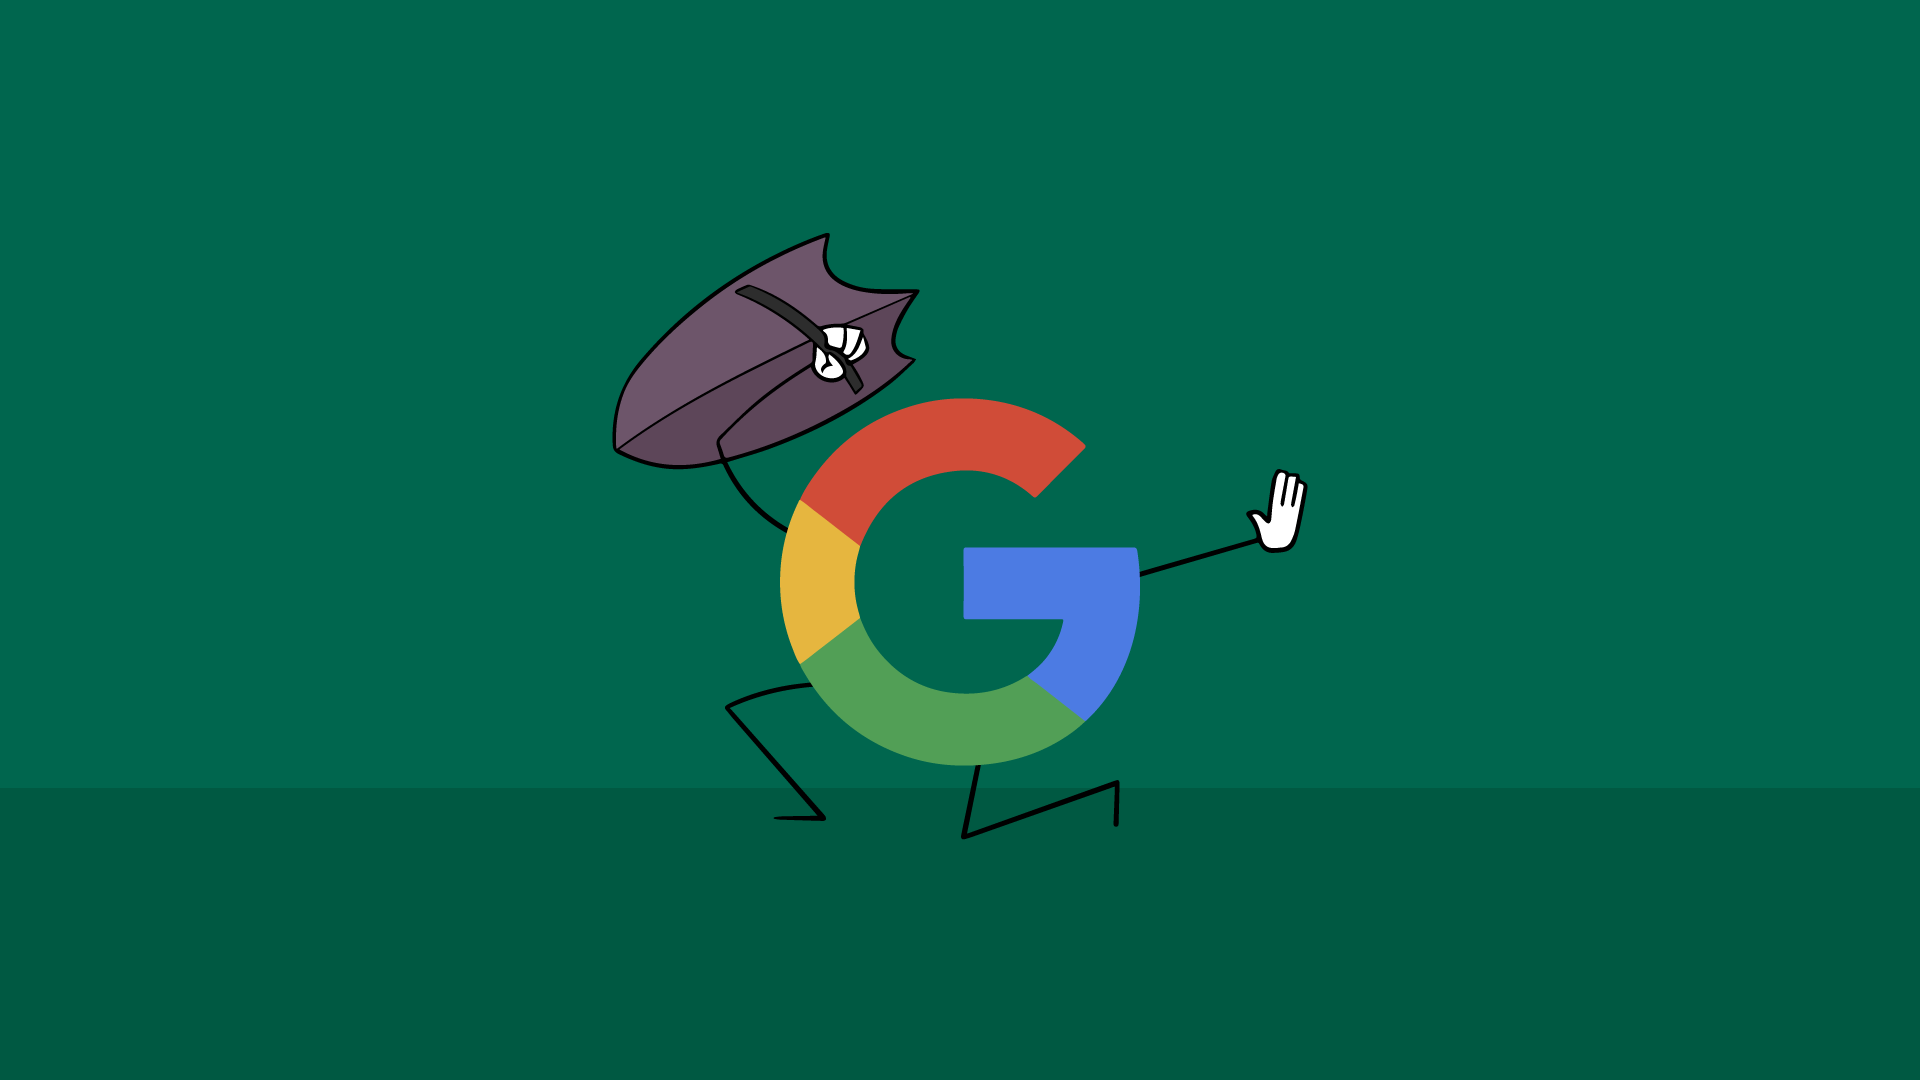 Under Google’s Shield: How Protection of PHI Influences Healthcare Marketing